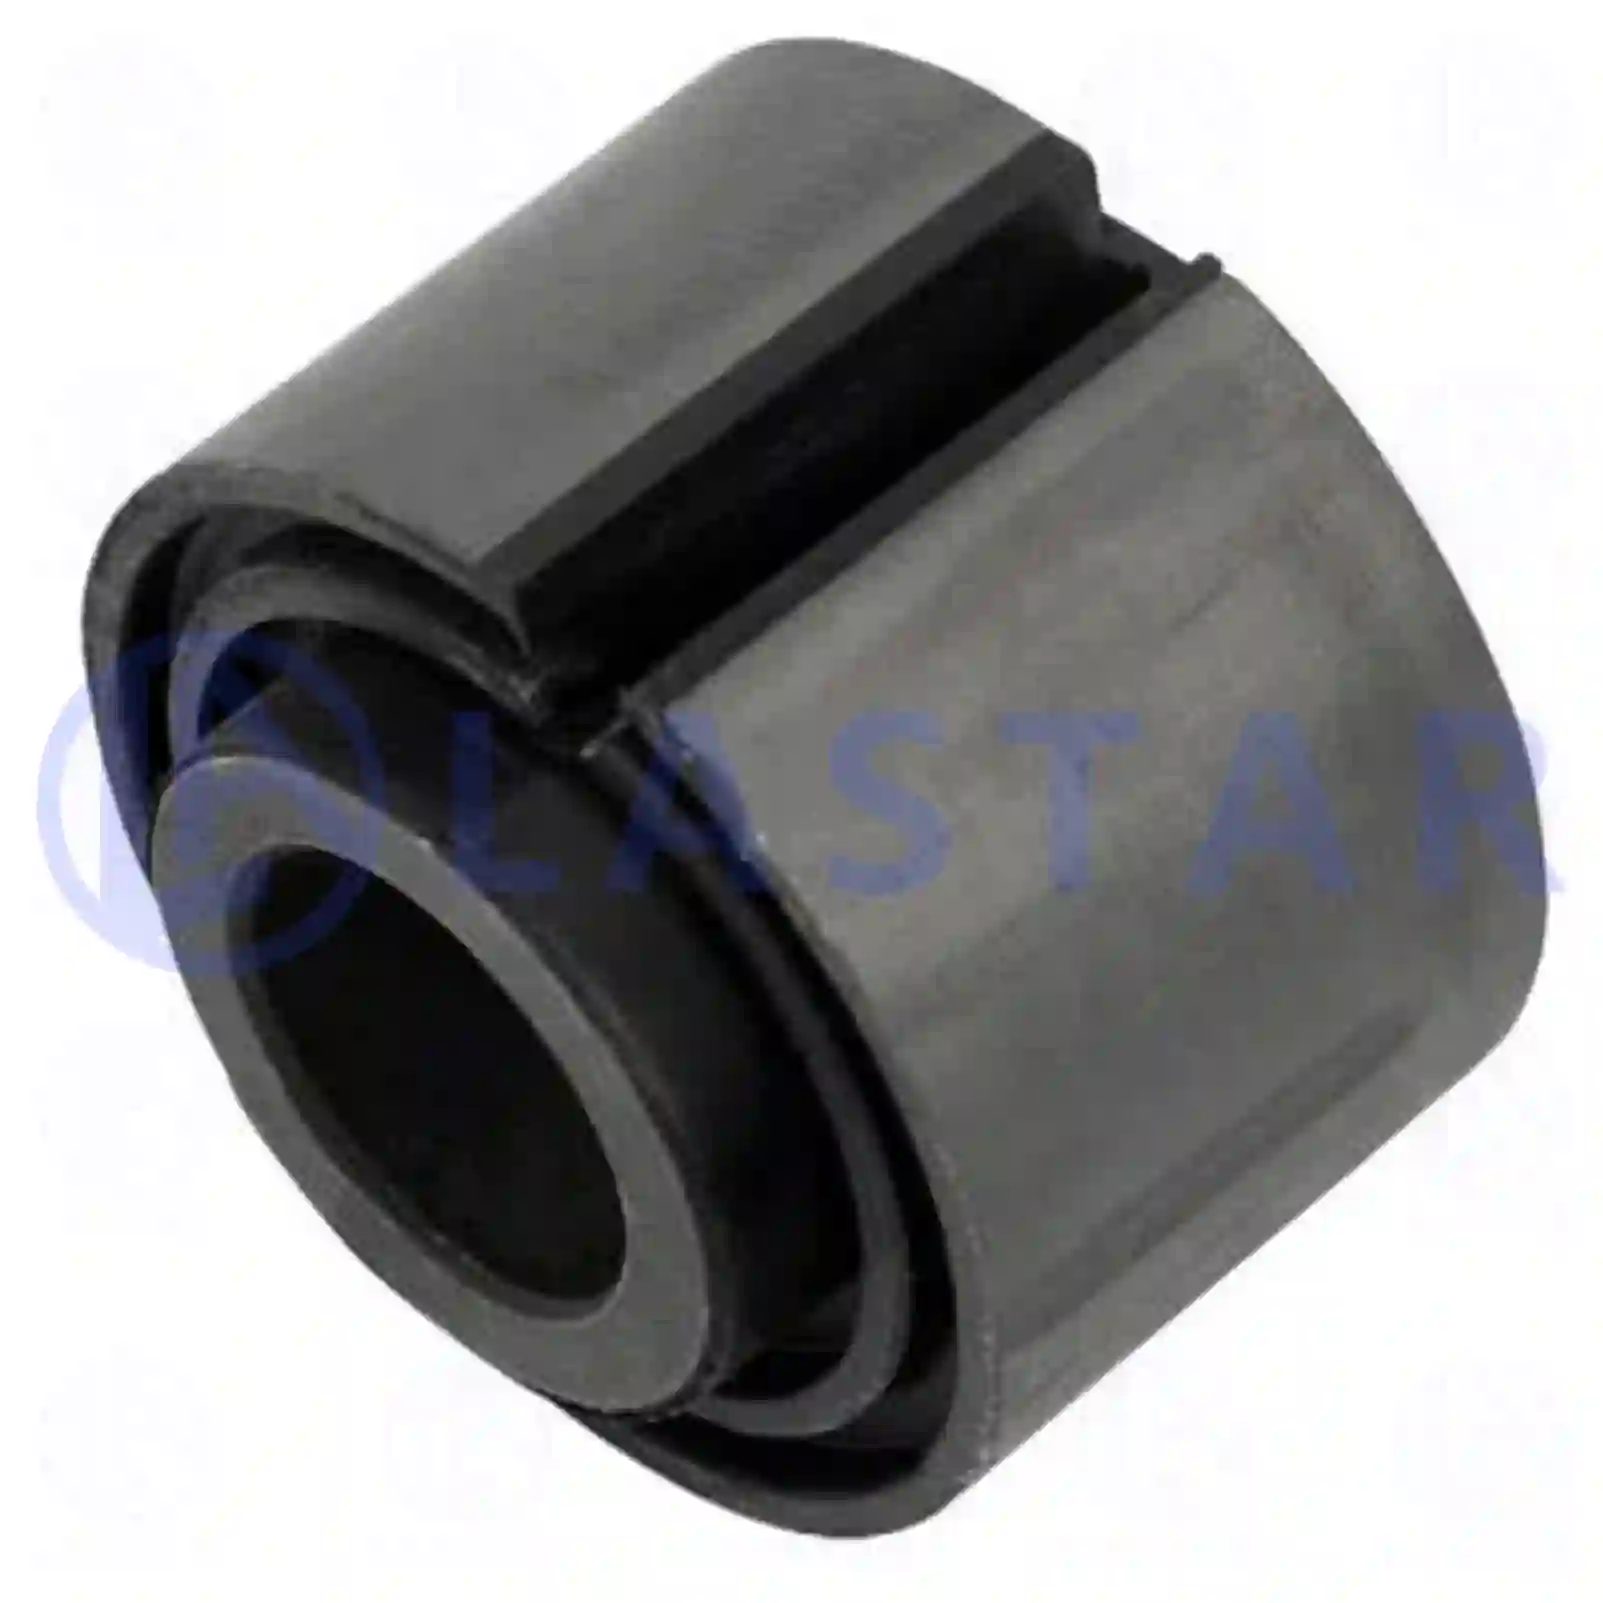 Bushing, stabilizer, 77728346, 9743270181 ||  77728346 Lastar Spare Part | Truck Spare Parts, Auotomotive Spare Parts Bushing, stabilizer, 77728346, 9743270181 ||  77728346 Lastar Spare Part | Truck Spare Parts, Auotomotive Spare Parts